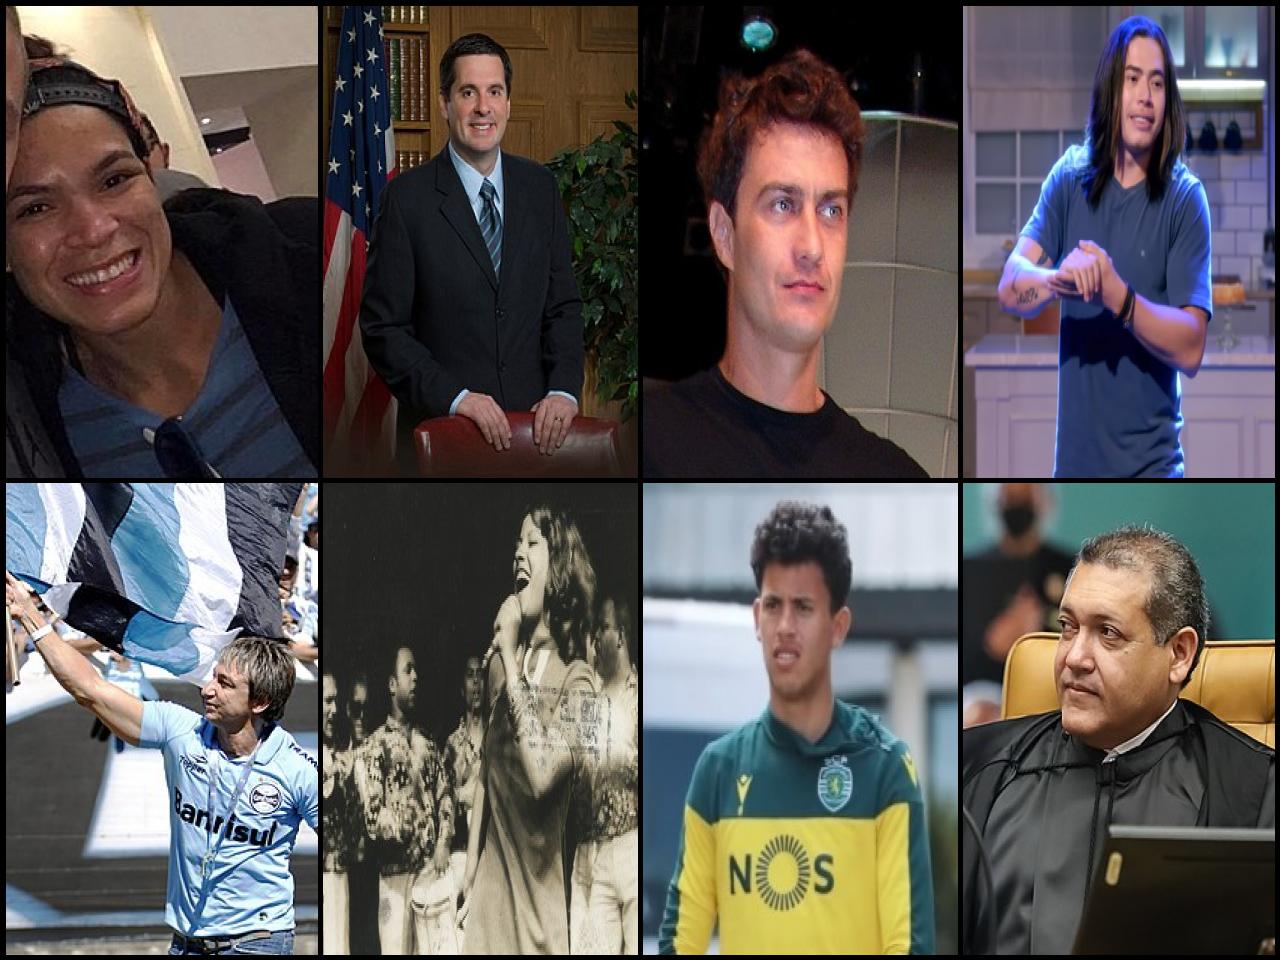 Famous People with surname Nunes